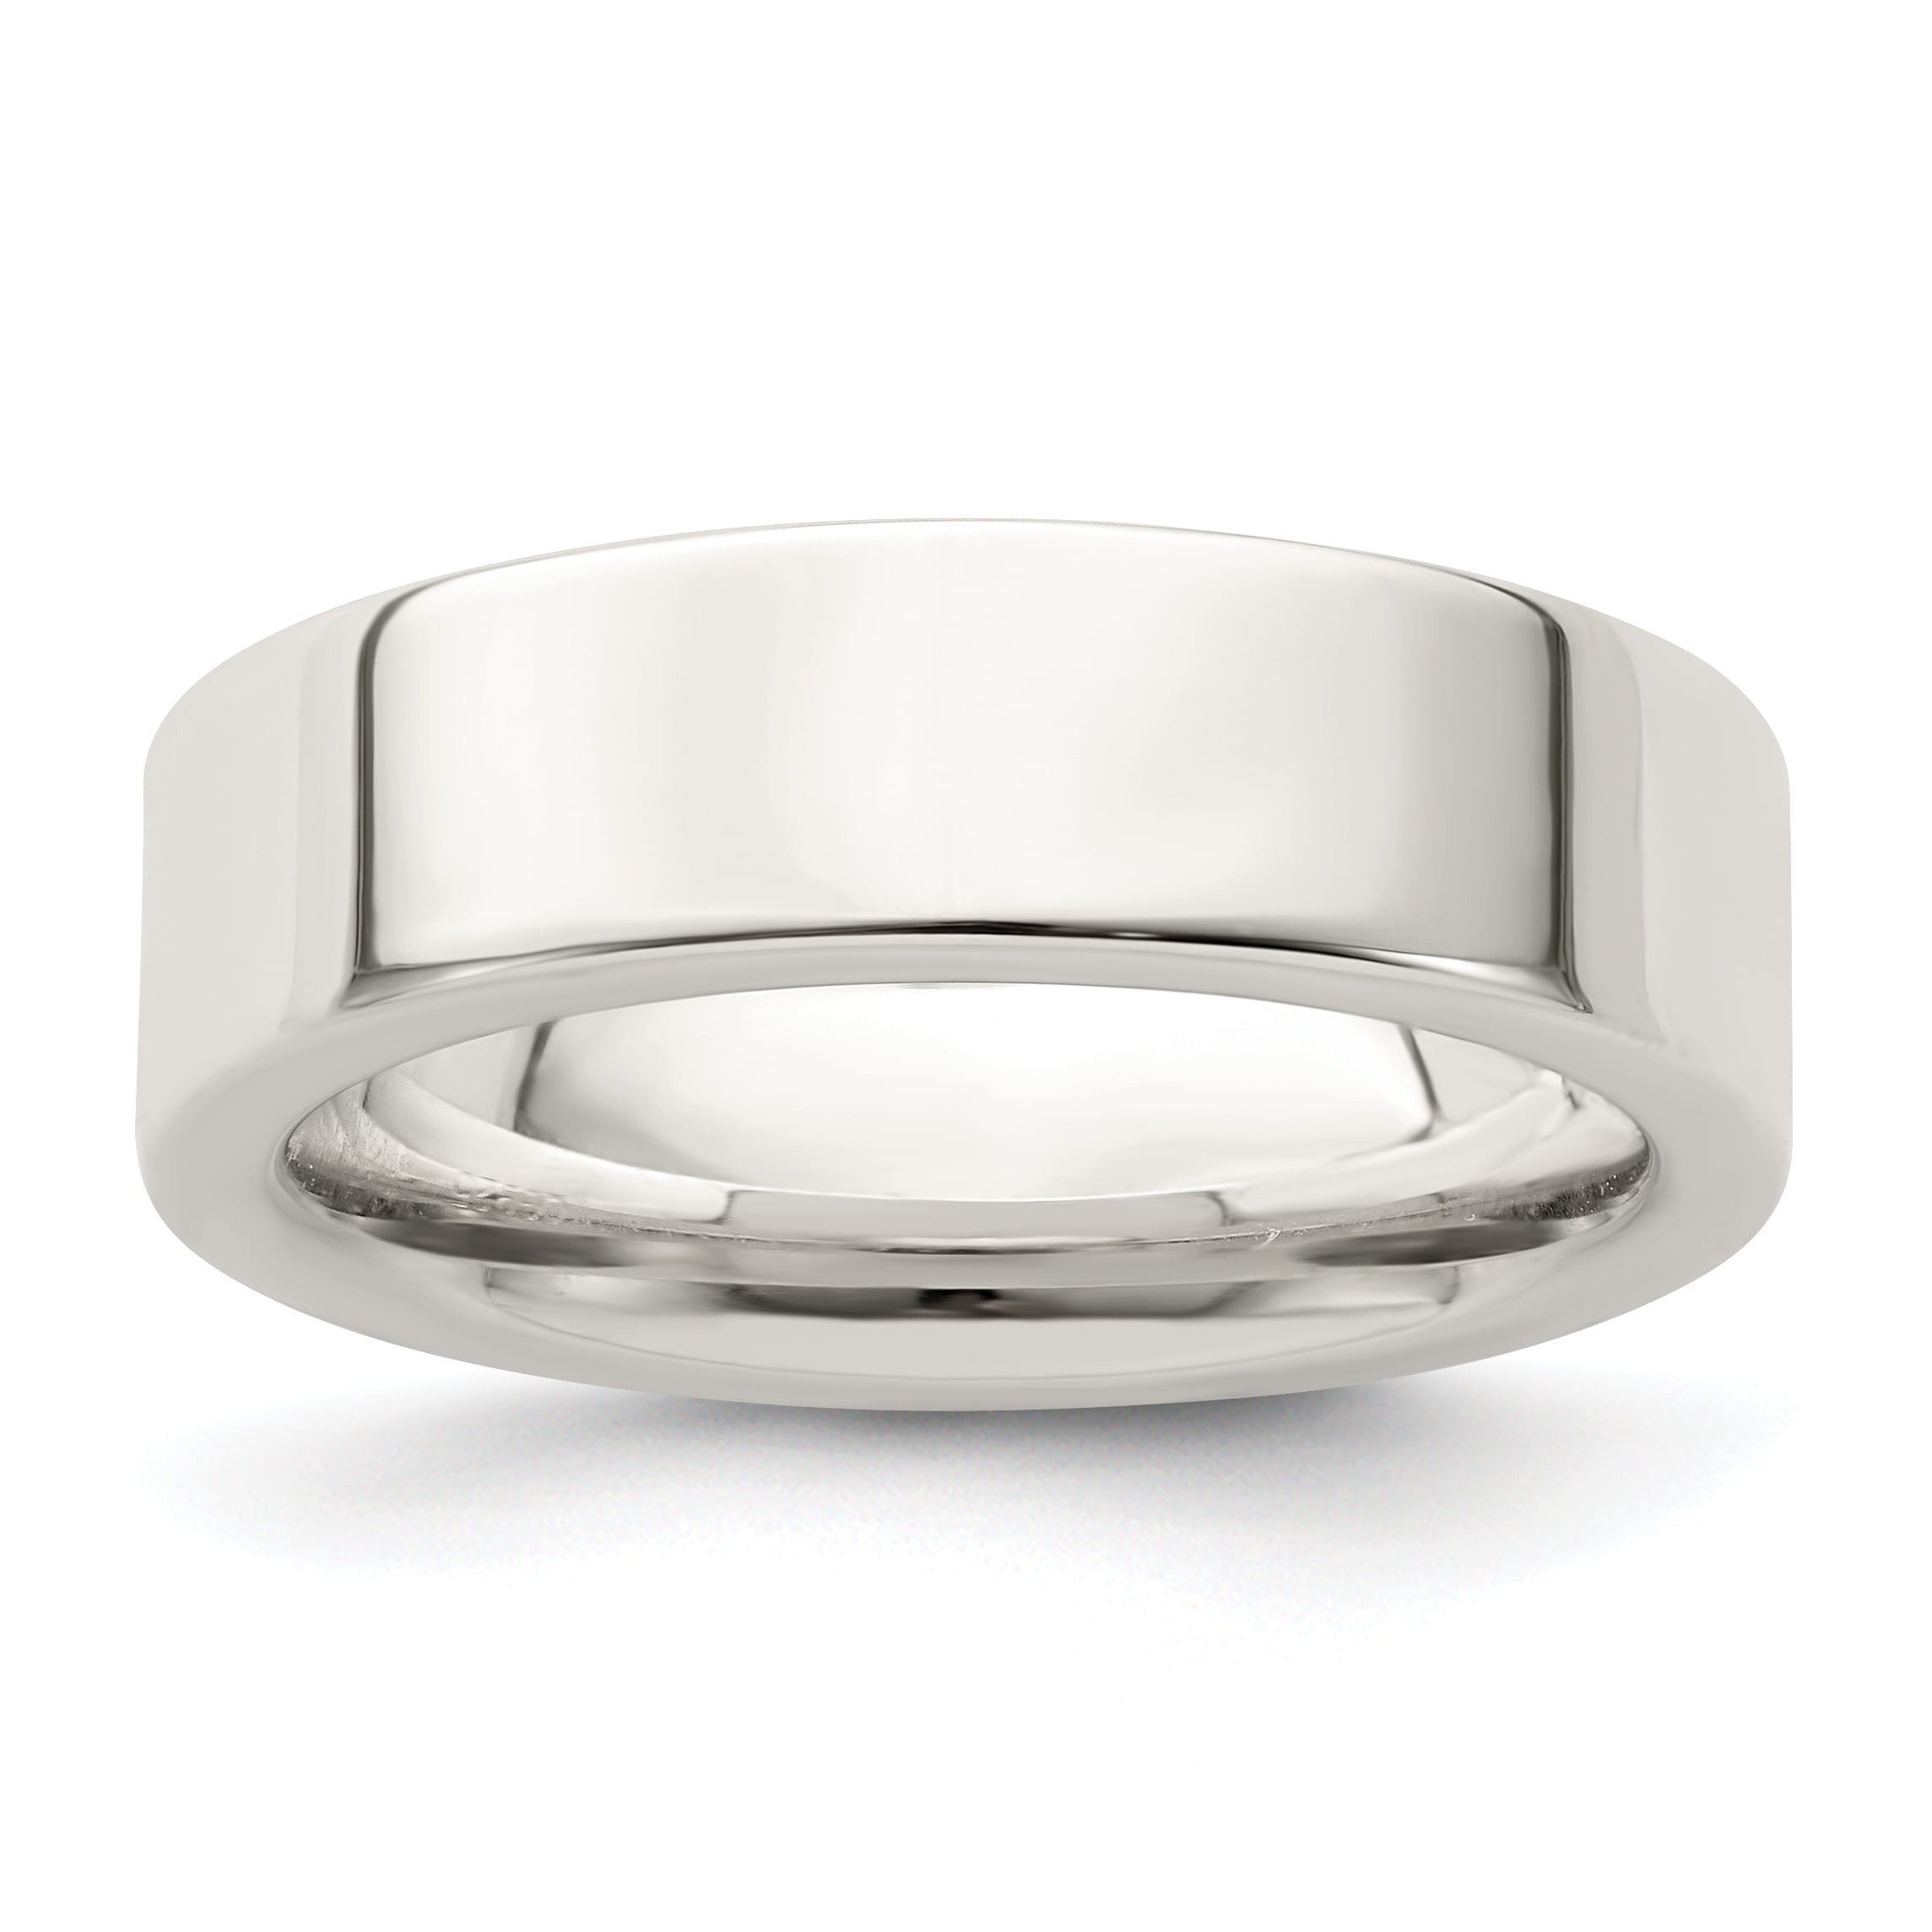 Sterling Silver 6mm Comfort Fit Band 